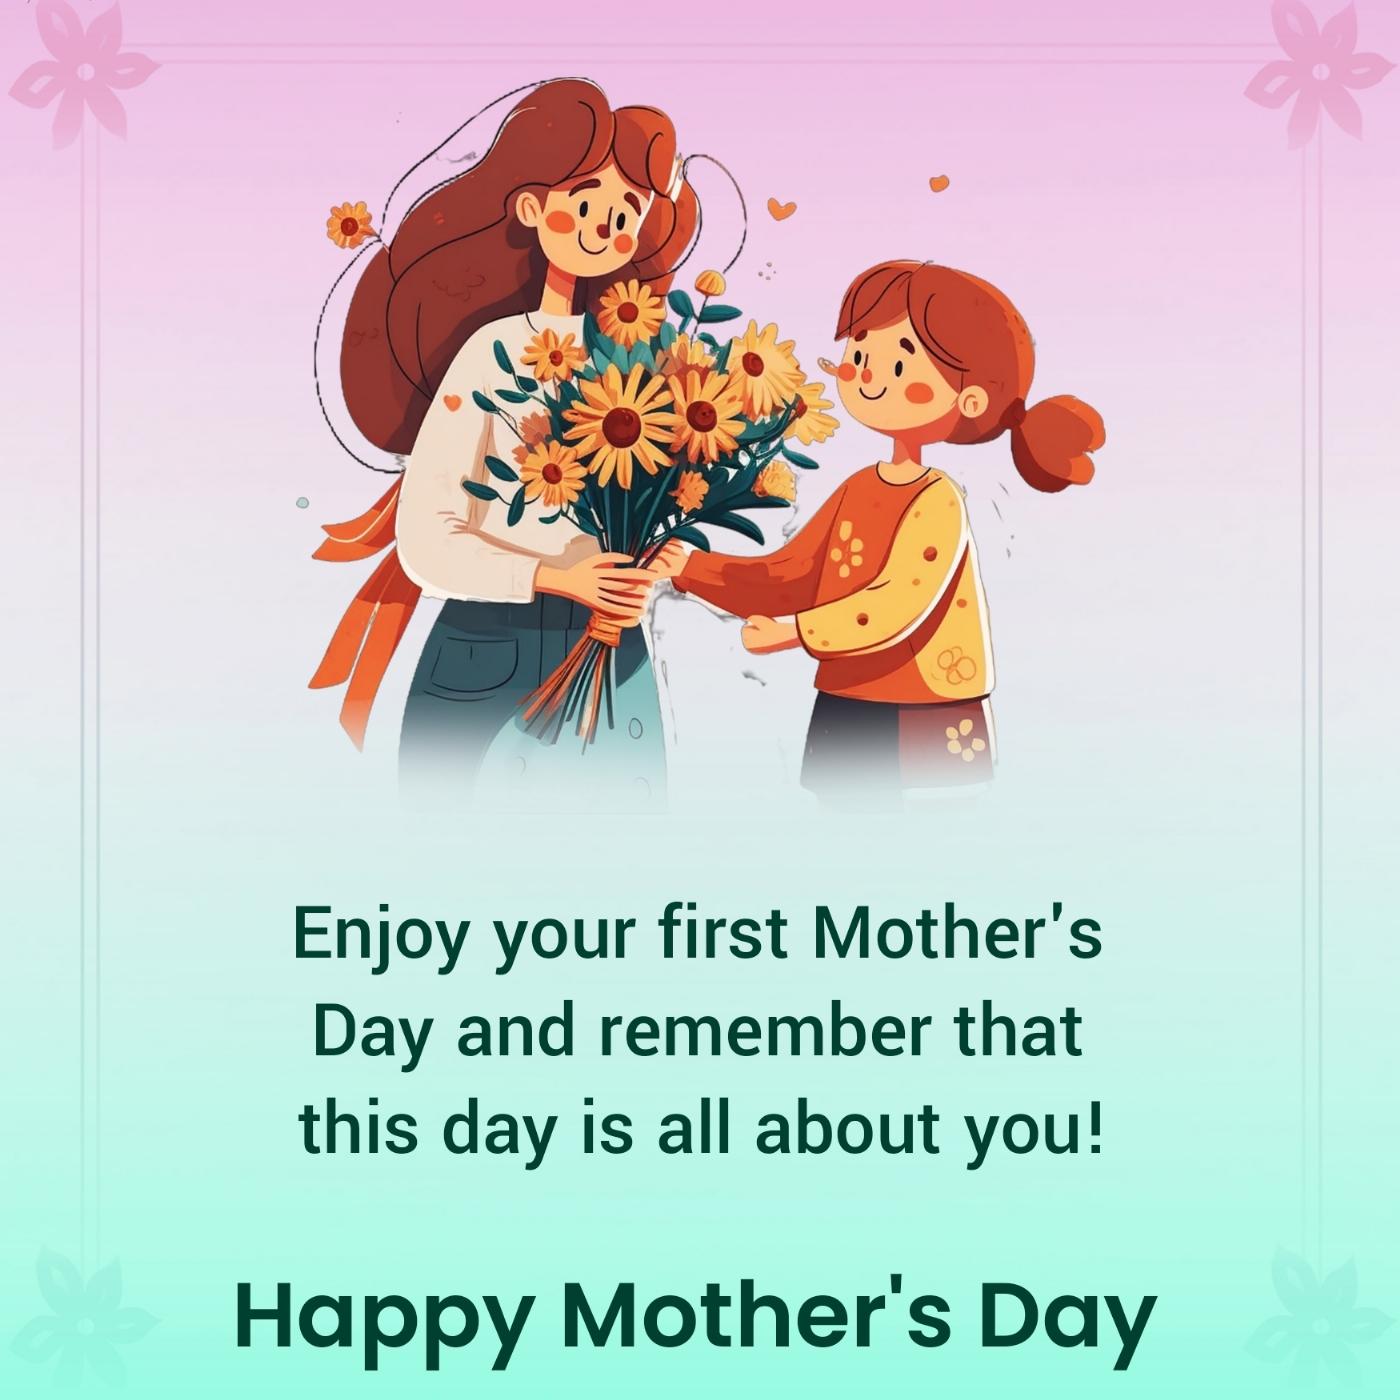 Enjoy your first Mother's Day and remember that this day